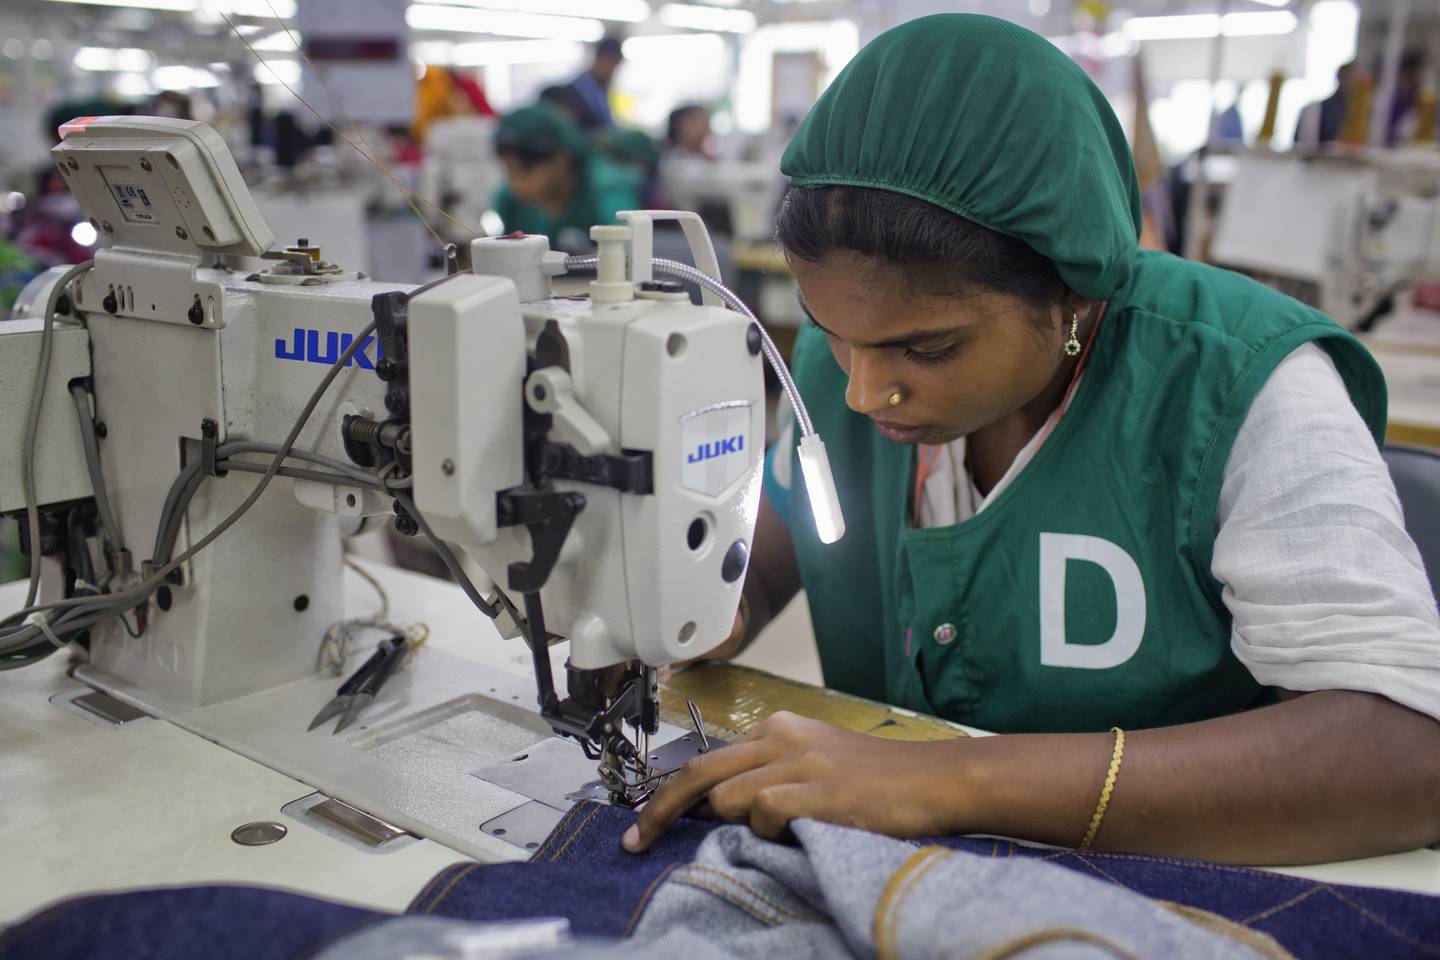 In this April 19, 2018 photo, Bangladeshi garment worker Ruma Akter, 25, who worked at the Rana Plaza garment factory that collapsed five years earlier, works at Snowtex garment factory in Dhamrai, near Dhaka, Bangladesh. A new survey says that five years after the factory building collapse in Bangladesh killed 1,134 people and left thousands injured some things have changed for the better for the workers who toiled in the country's huge garment industry but much remains to be done. The survey by the Center for Business and Human Rights at New York University's Stern School of Business found that the largest factories generally have complied with new safety standards set by foreign clothing brands since the 2013 accident. (AP Photo/A.M. Ahad)